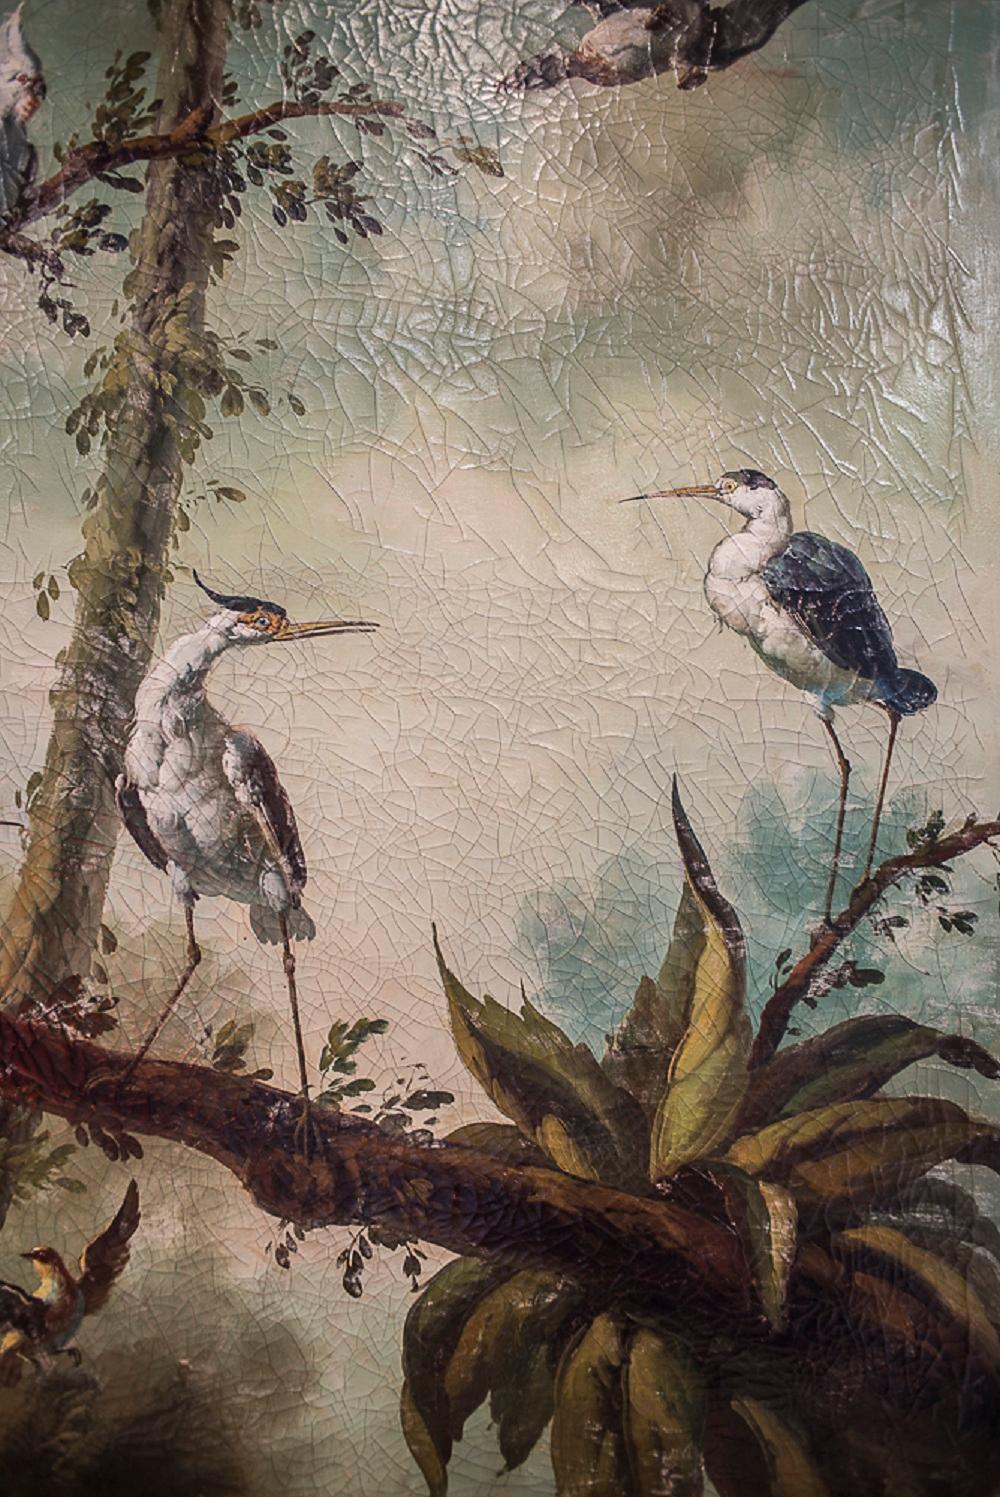 Equisite birds on blue and green background flamish of Flanders style oil on canvas, circa 1910
Restaured and cleaned, in the style of SXVII Dutch School. Its a touch of beauty and timeless
elegance in any space of the house, being able to